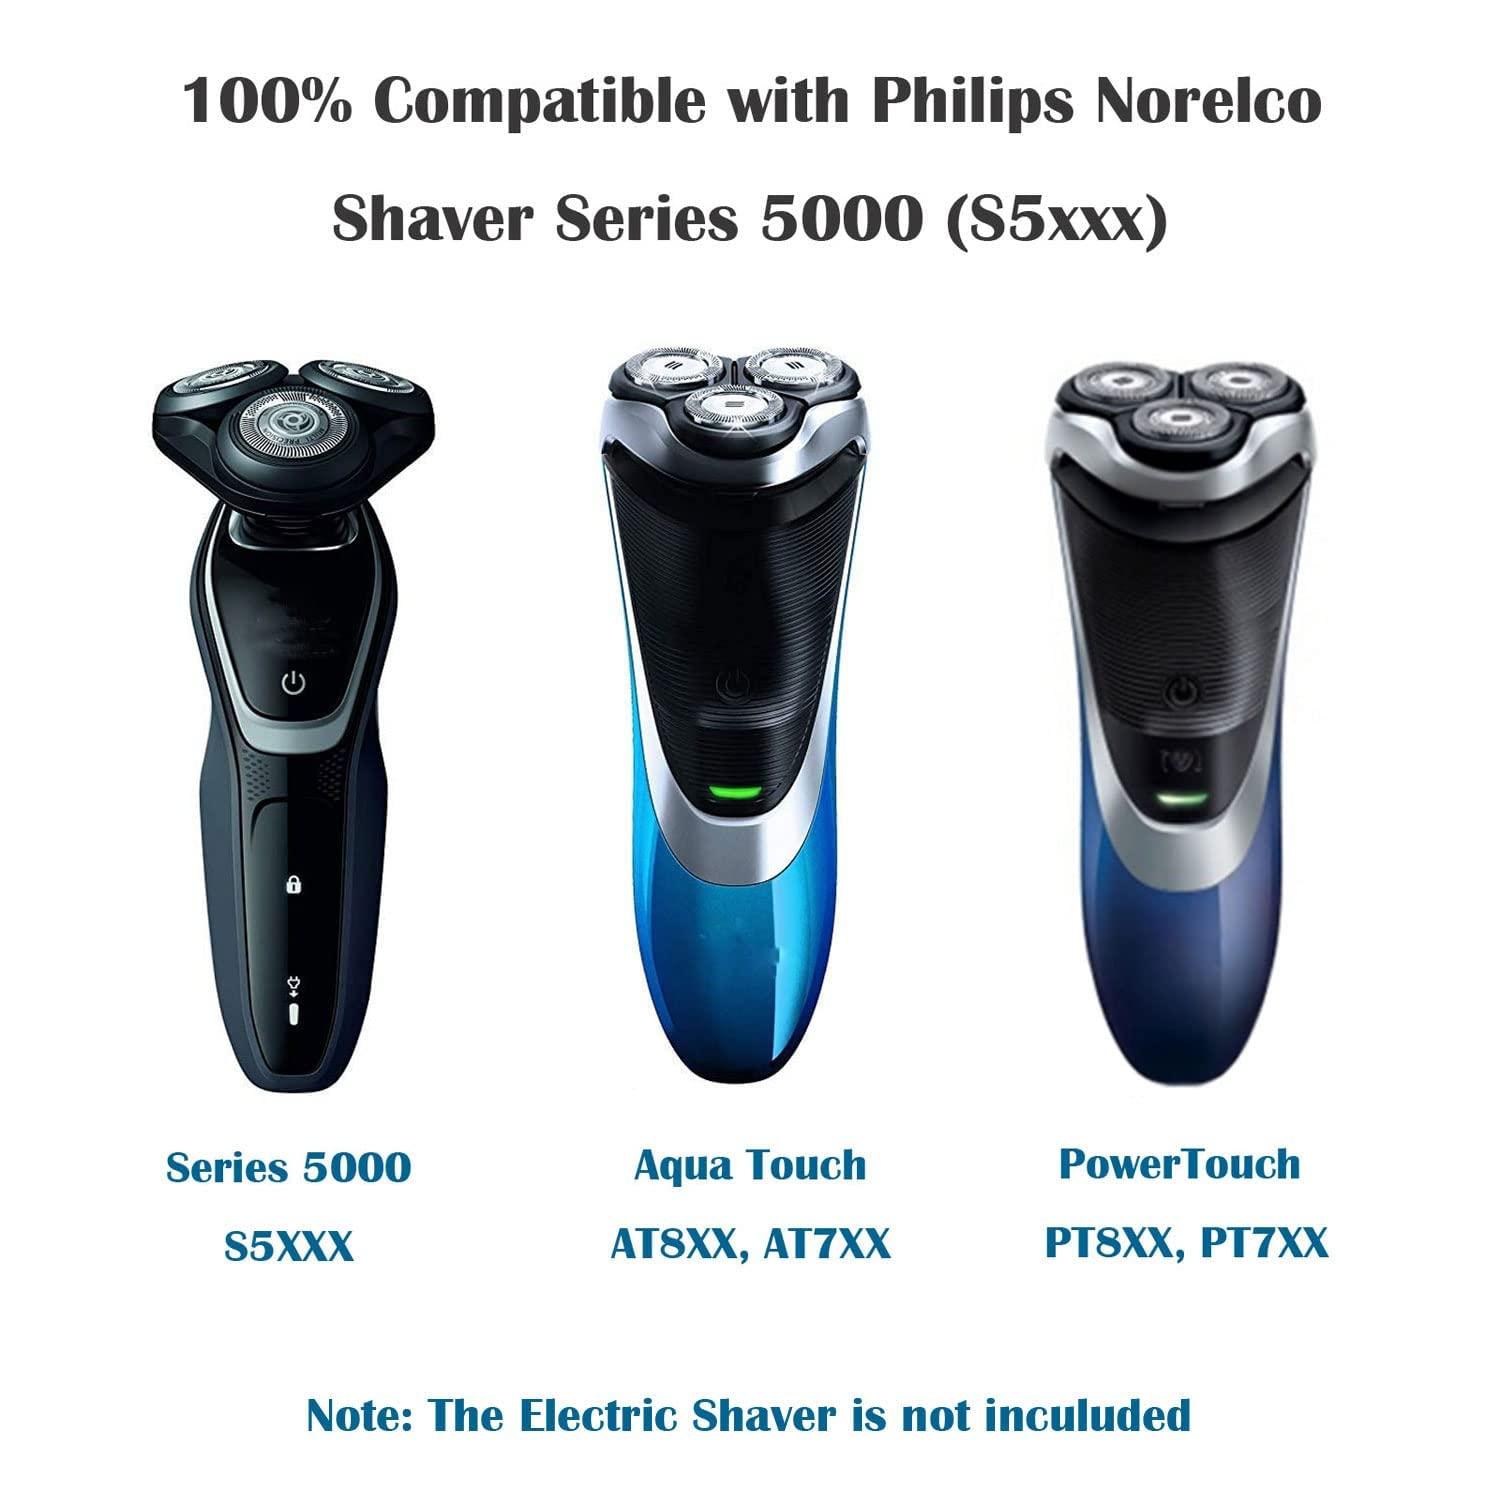 SH50/52 Replacement Heads for Philips Norelco Series 5000 Electric Shaver, Replacement Blades Head Fit for Phillips Series 5000 (S5xxx), (PT8xx, PT7xx), 3-Pack with 3 Pack